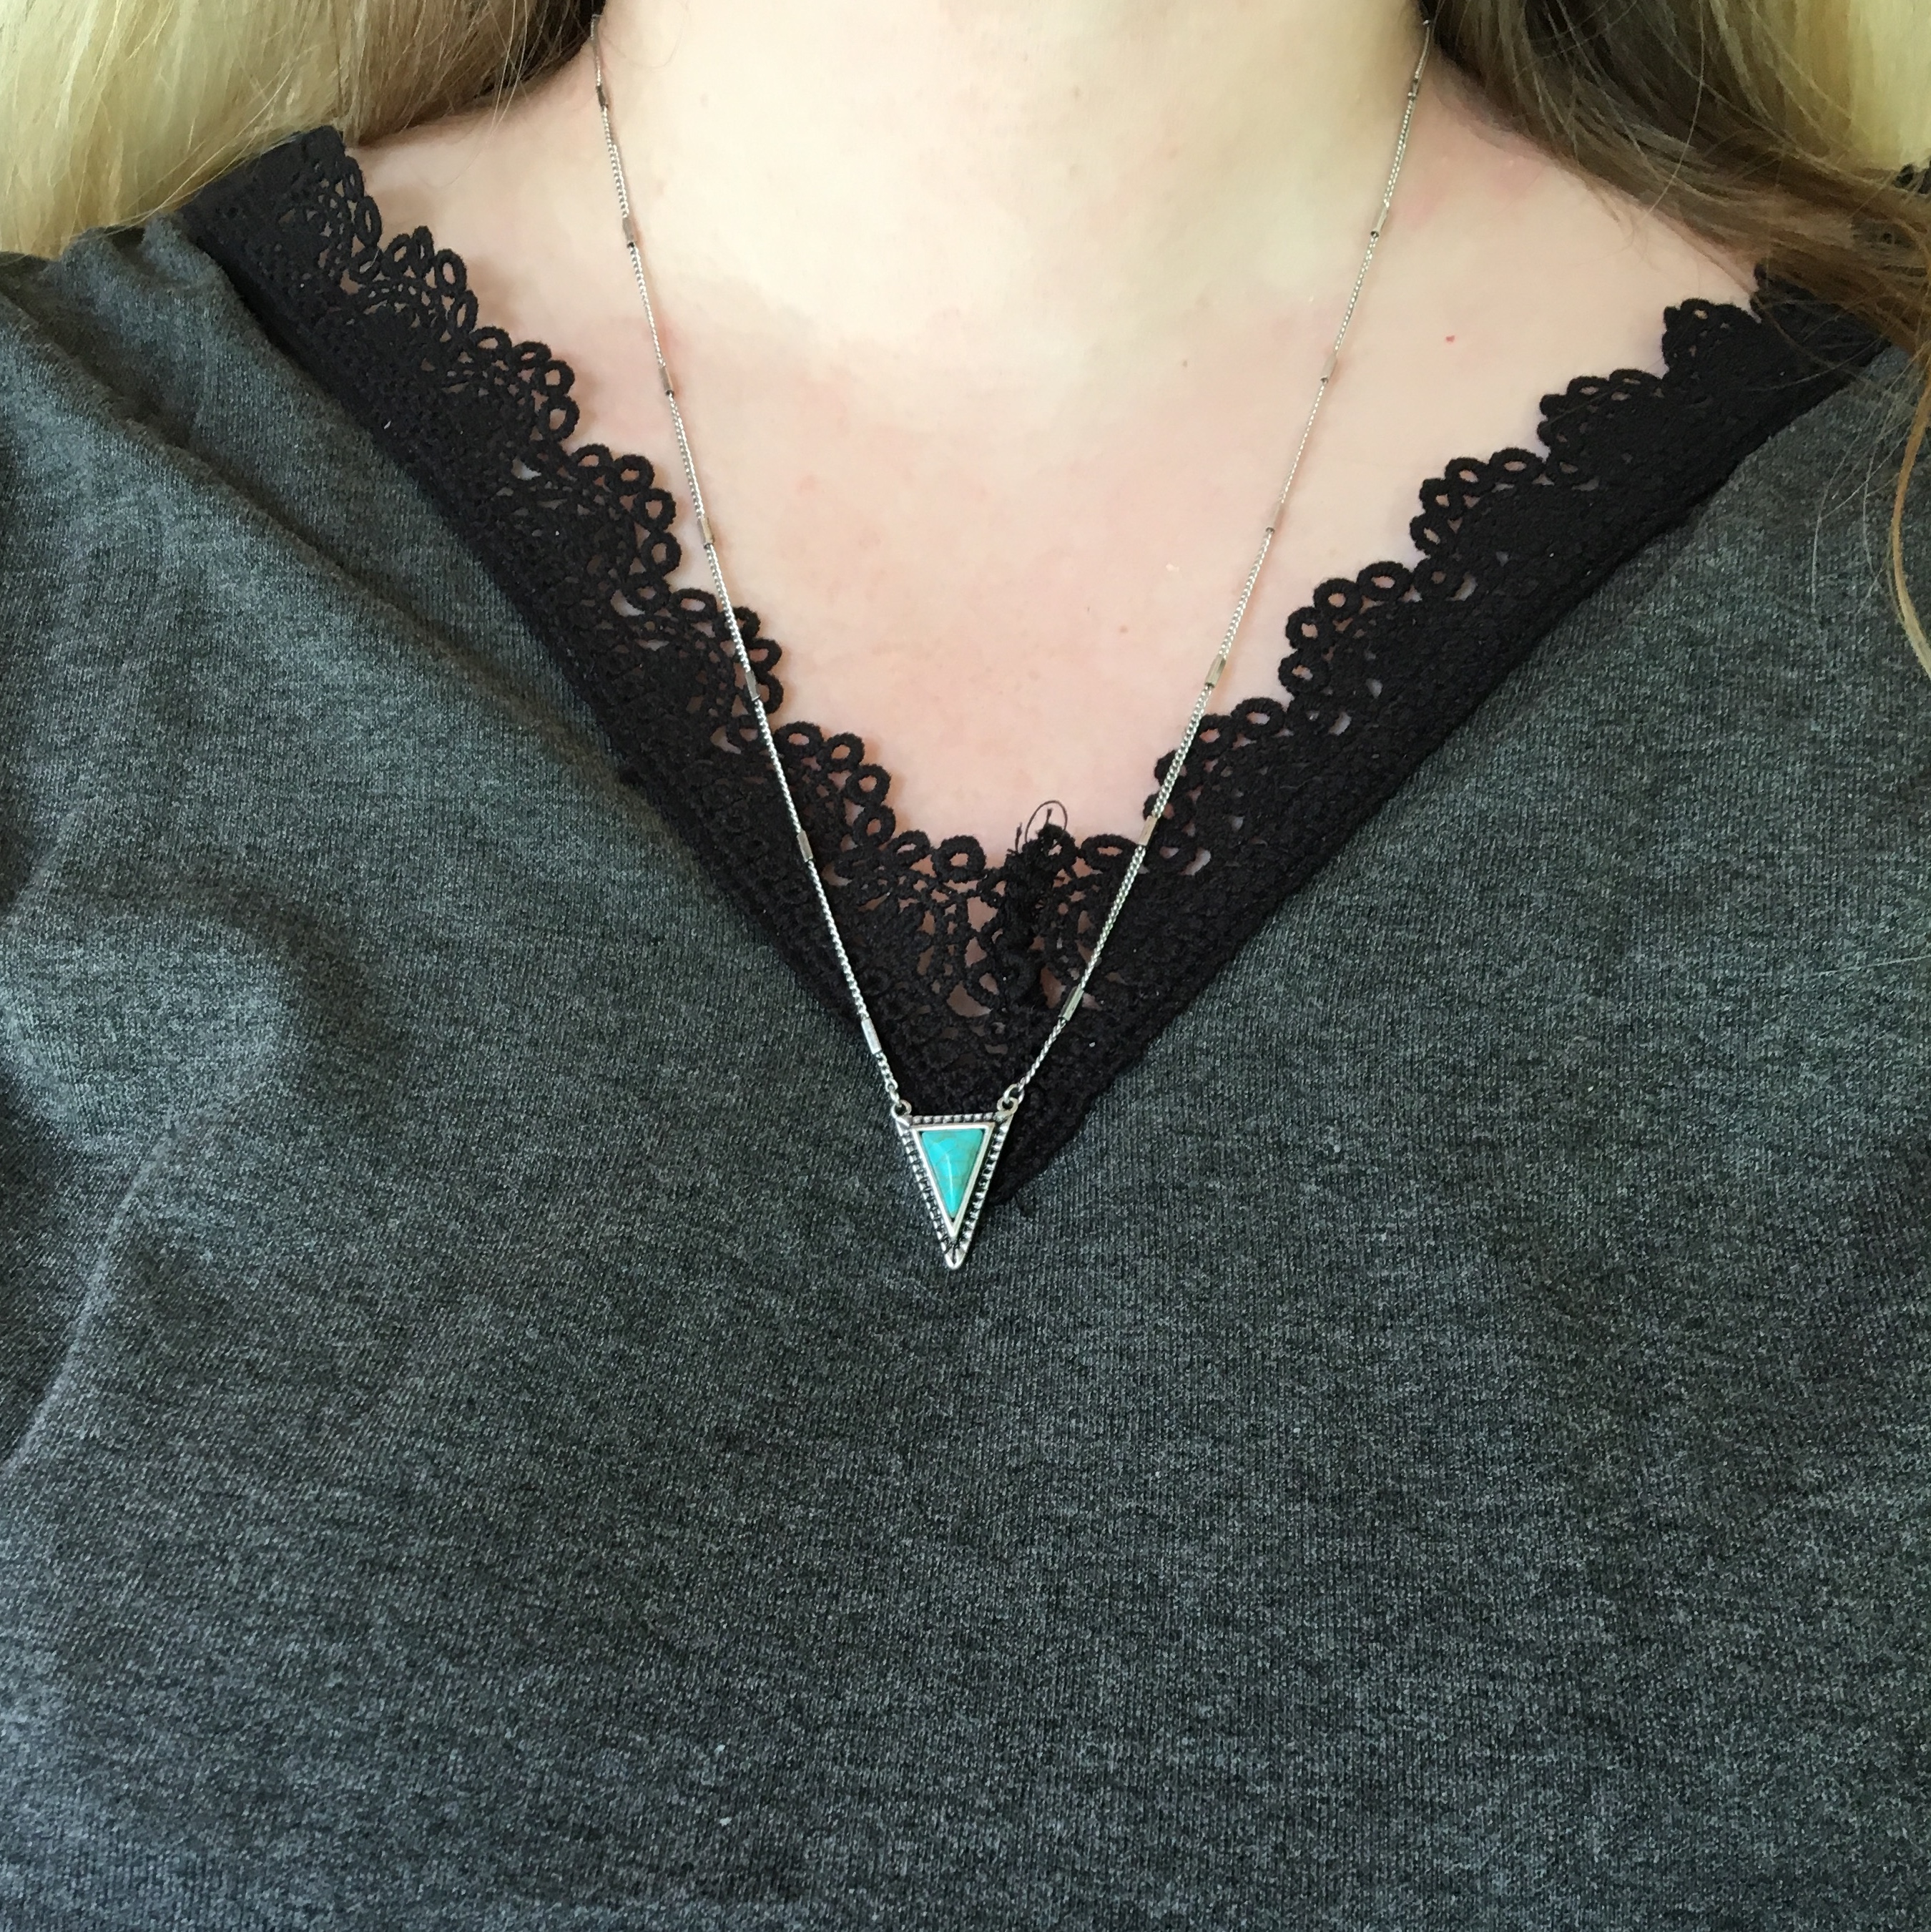 Goddess Provisions Divine Feminine May 2019 subscription box review necklace on neck